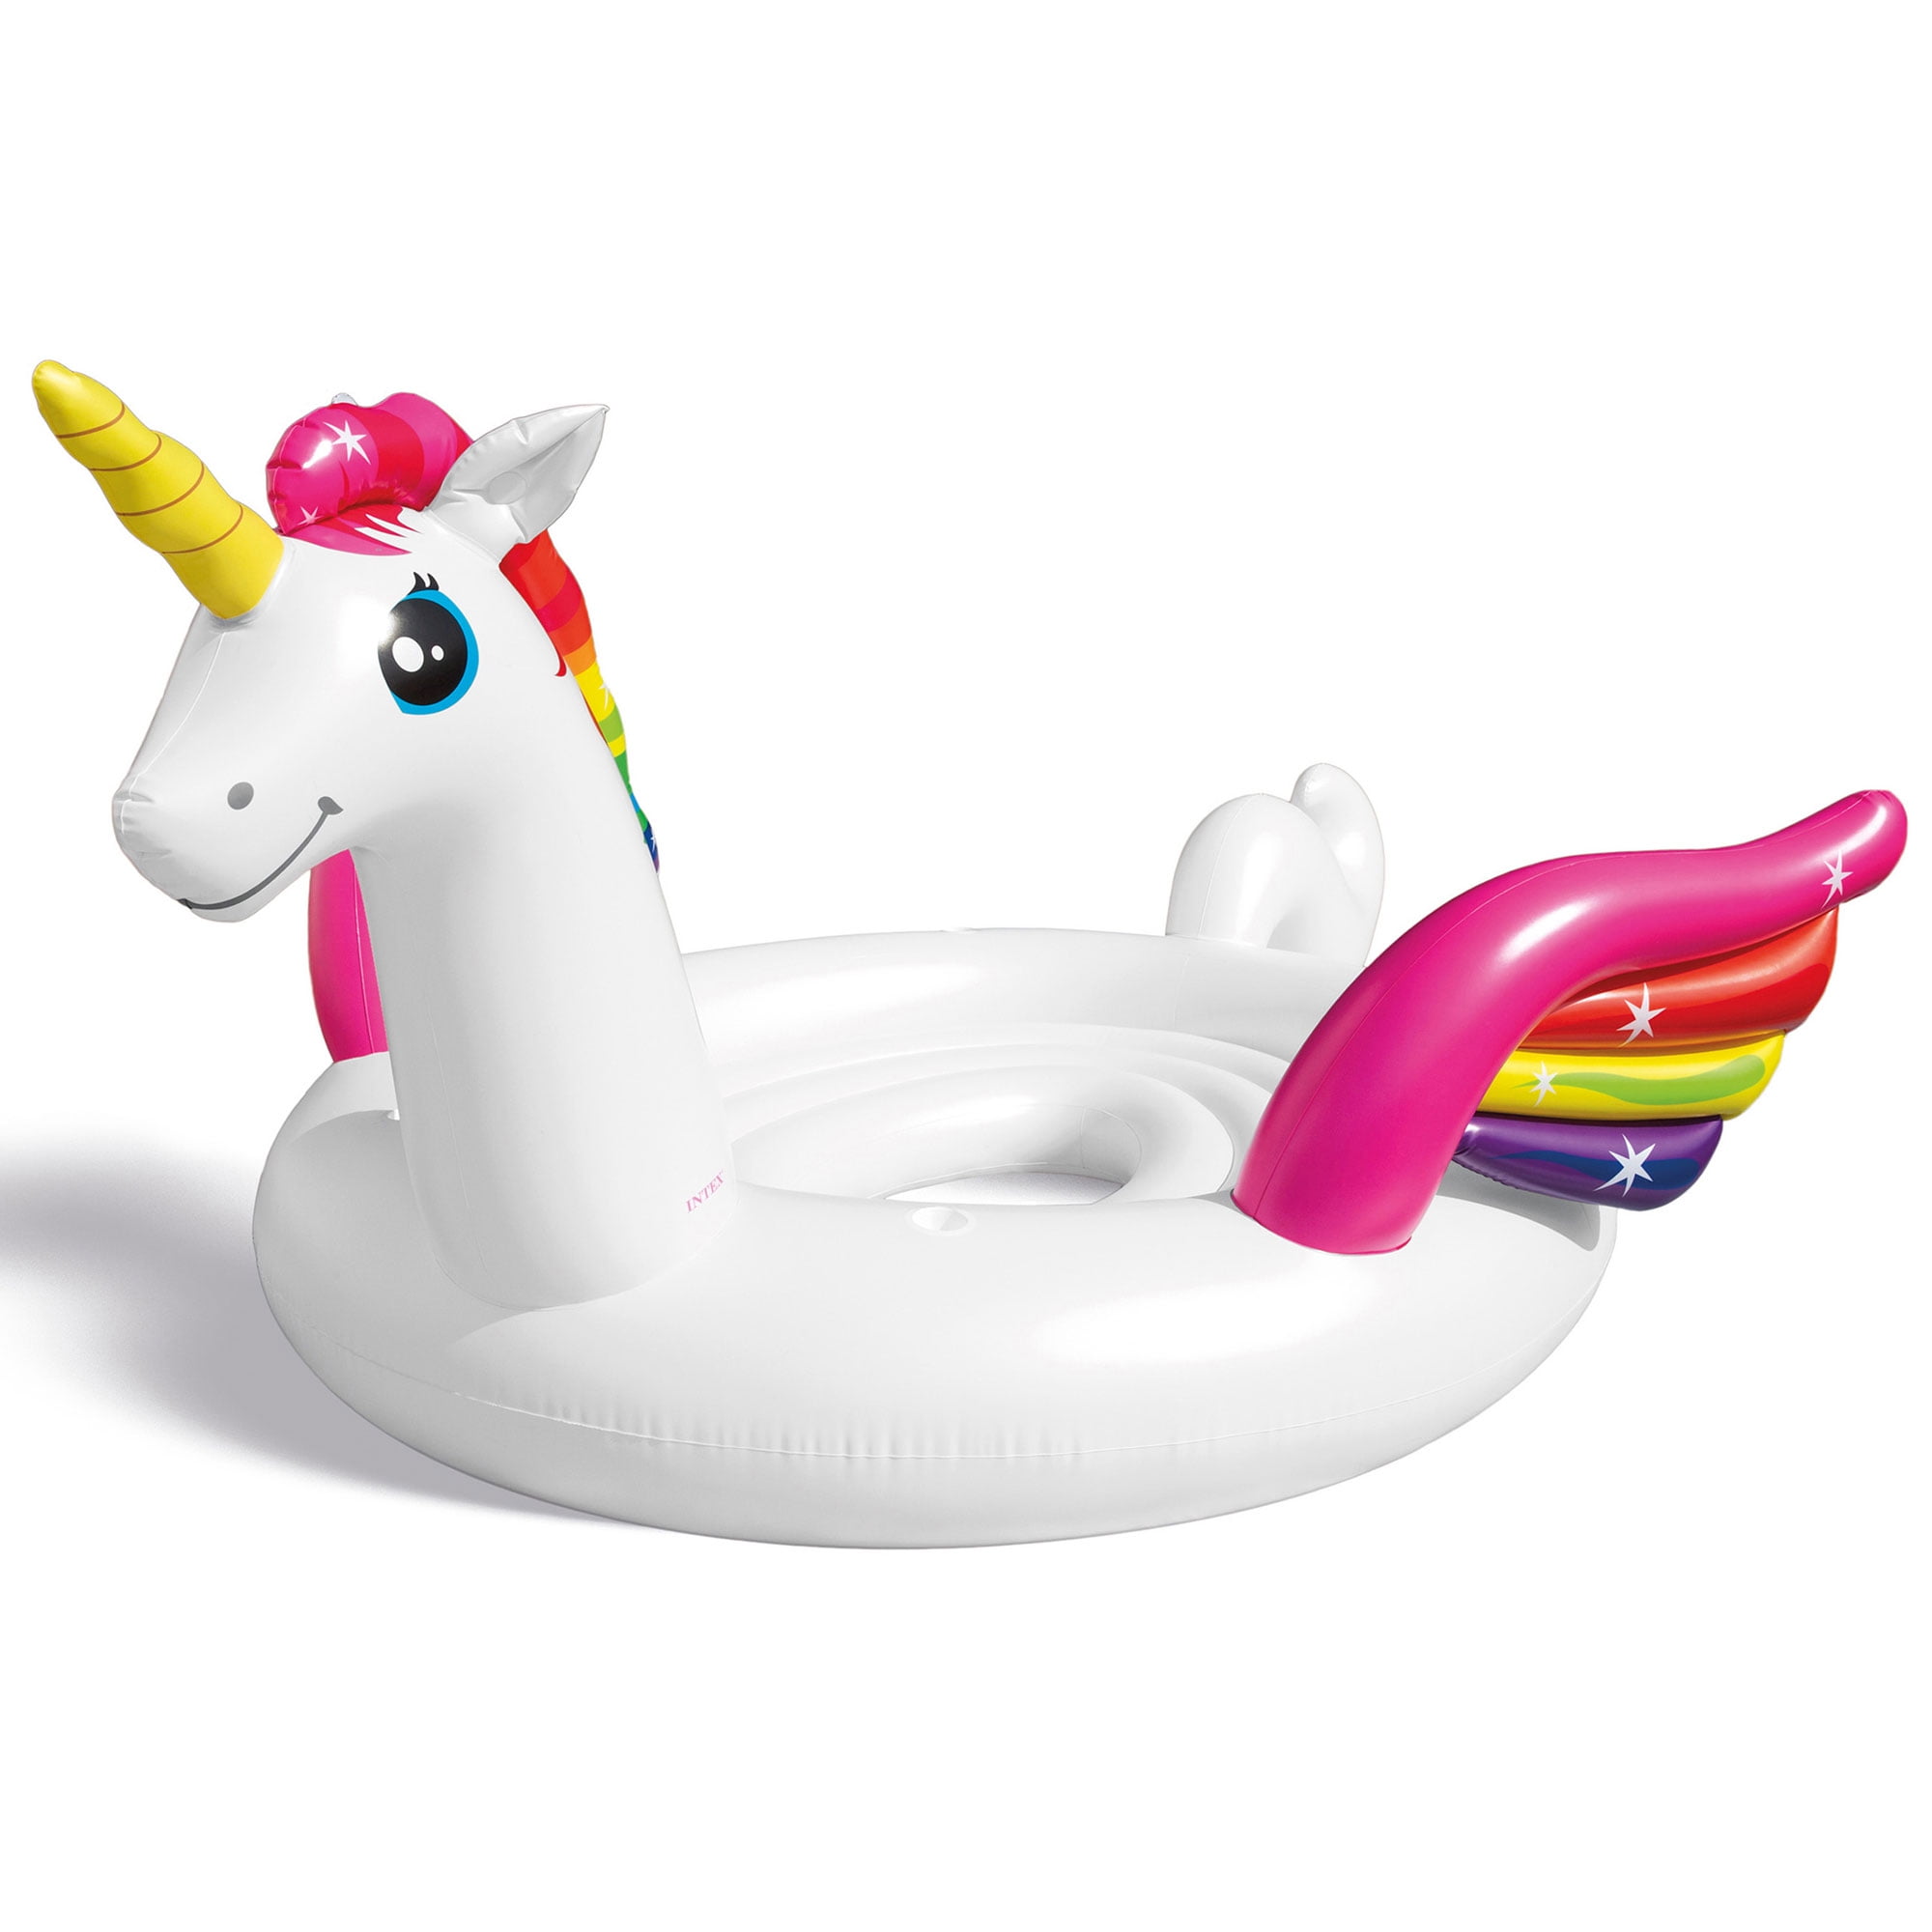 Giant Inflatable Unicorn Up To 5ft Tall Recommeded For Children Aged 3+. 